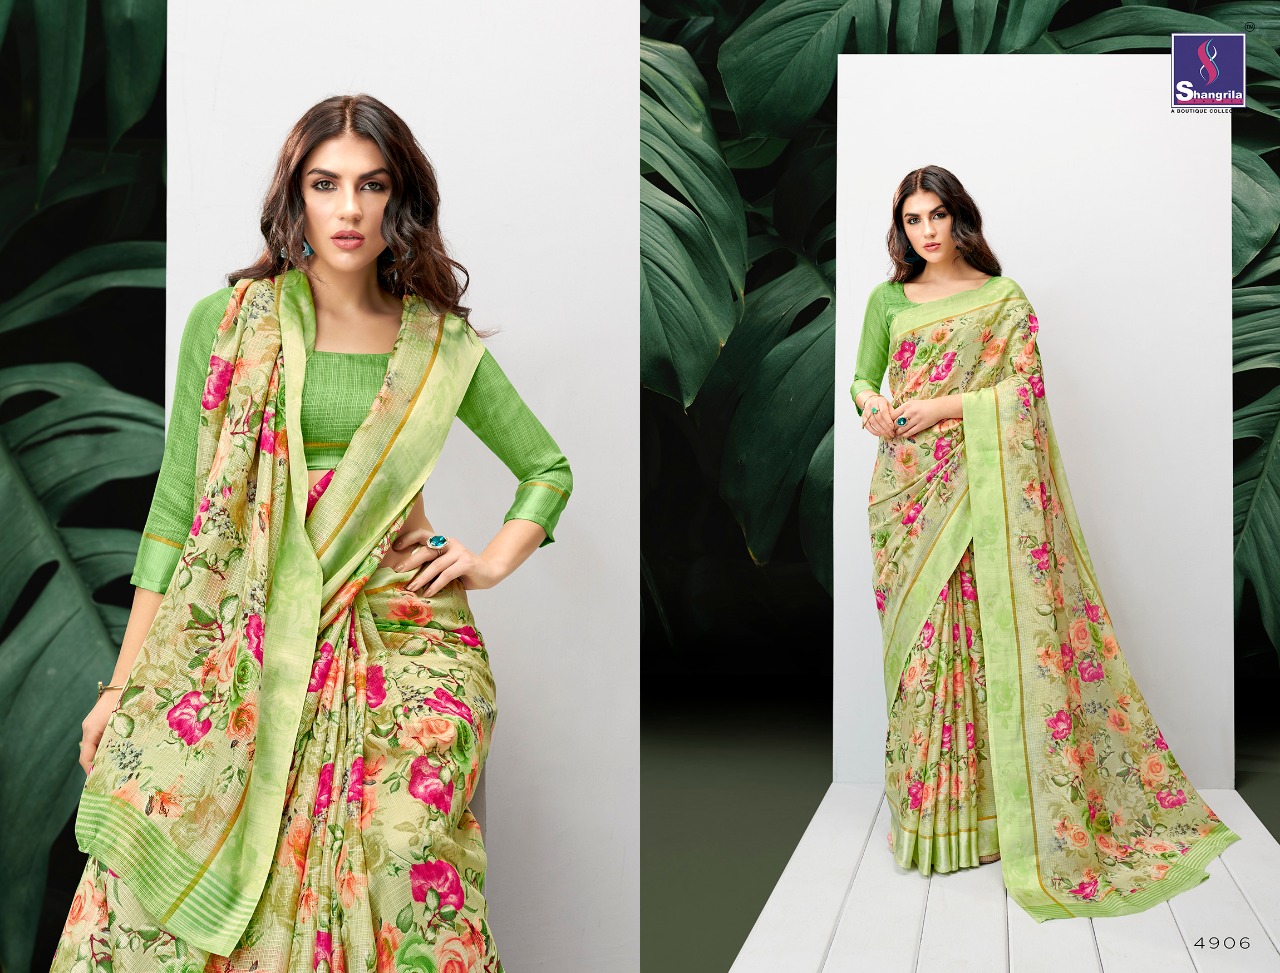 Shangrila rayesha cotton fancy Traditional sarees collection